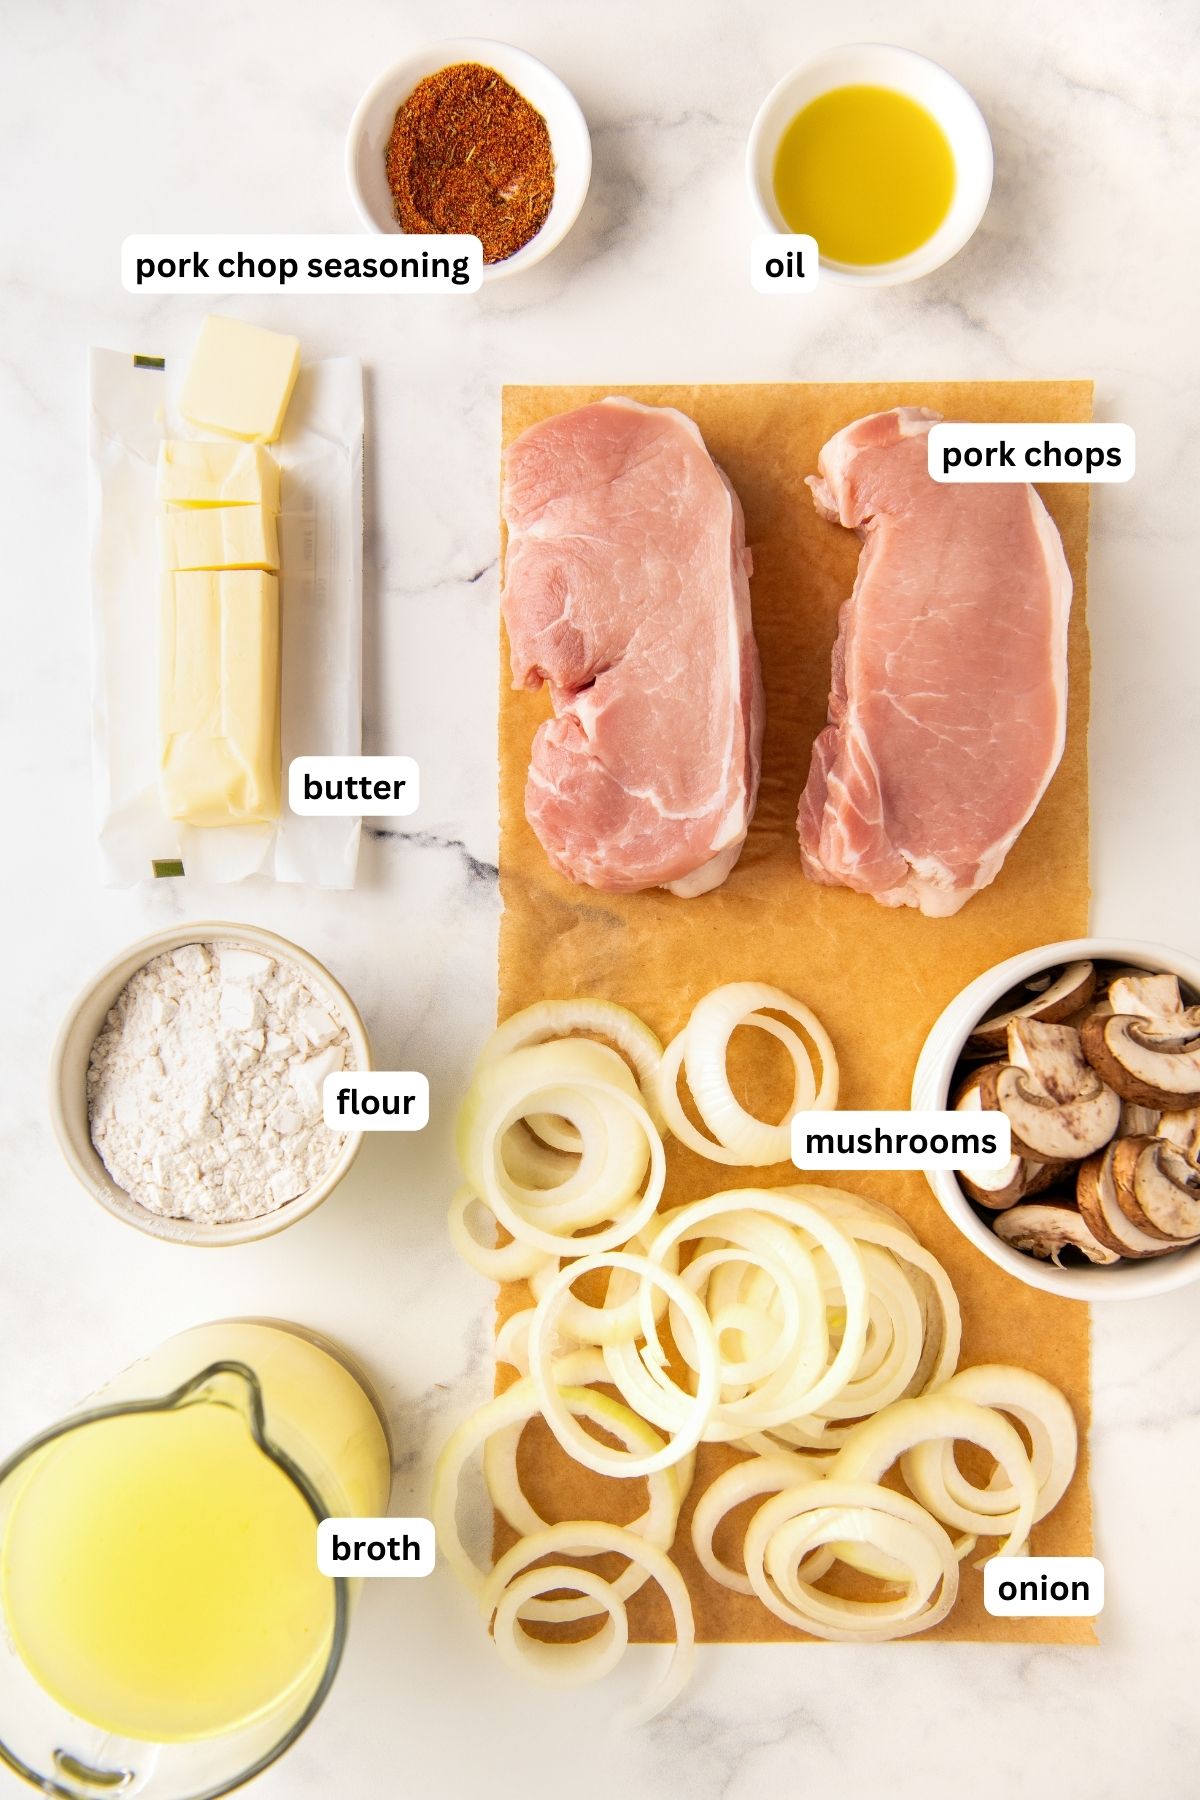 Ingredients for smothered pork chops recipe arranged in bowls. From top to bottom: pork chop seasoning, oil, butter, pork chops, flour, mushrooms, onion and broth.